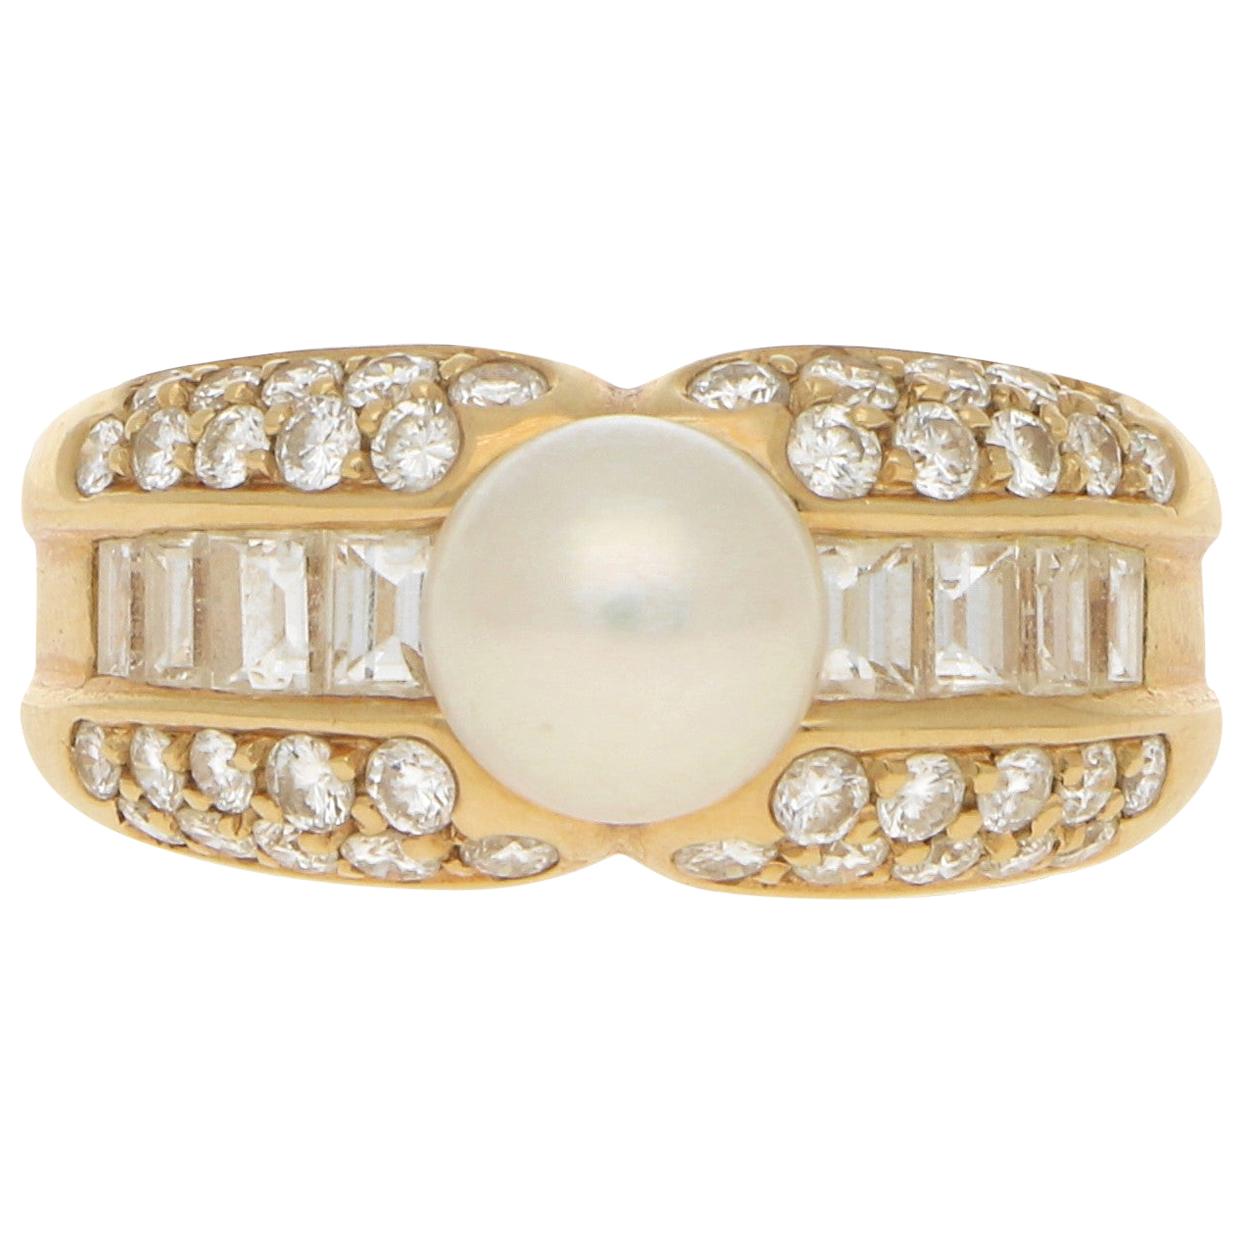 Cartier Pearl and Diamond Bombe Cocktail Ring in 18 Karat Yellow Gold